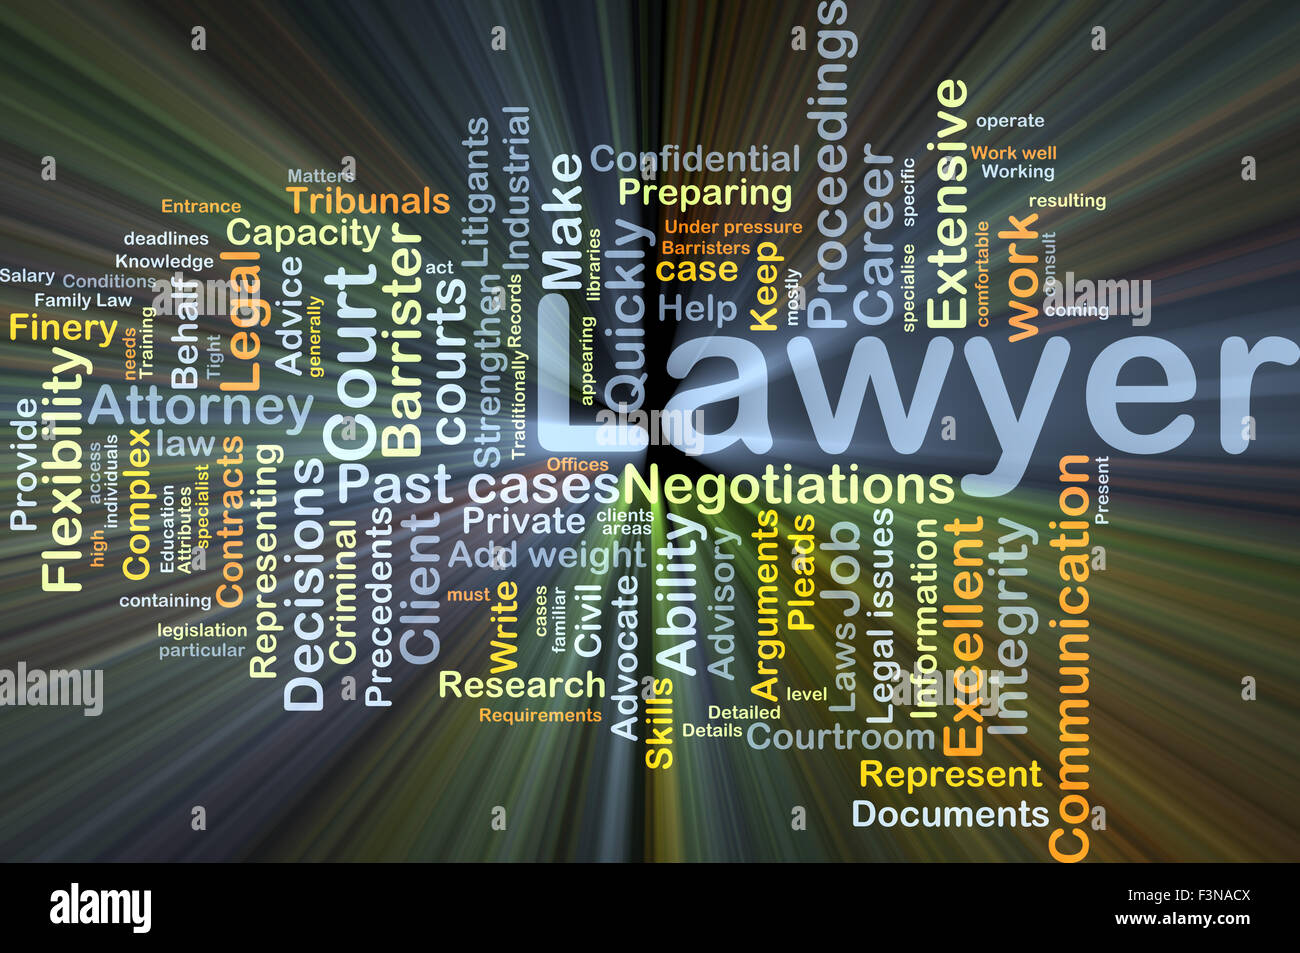 Background concept wordcloud illustration of lawyer glowing light Stock Photo